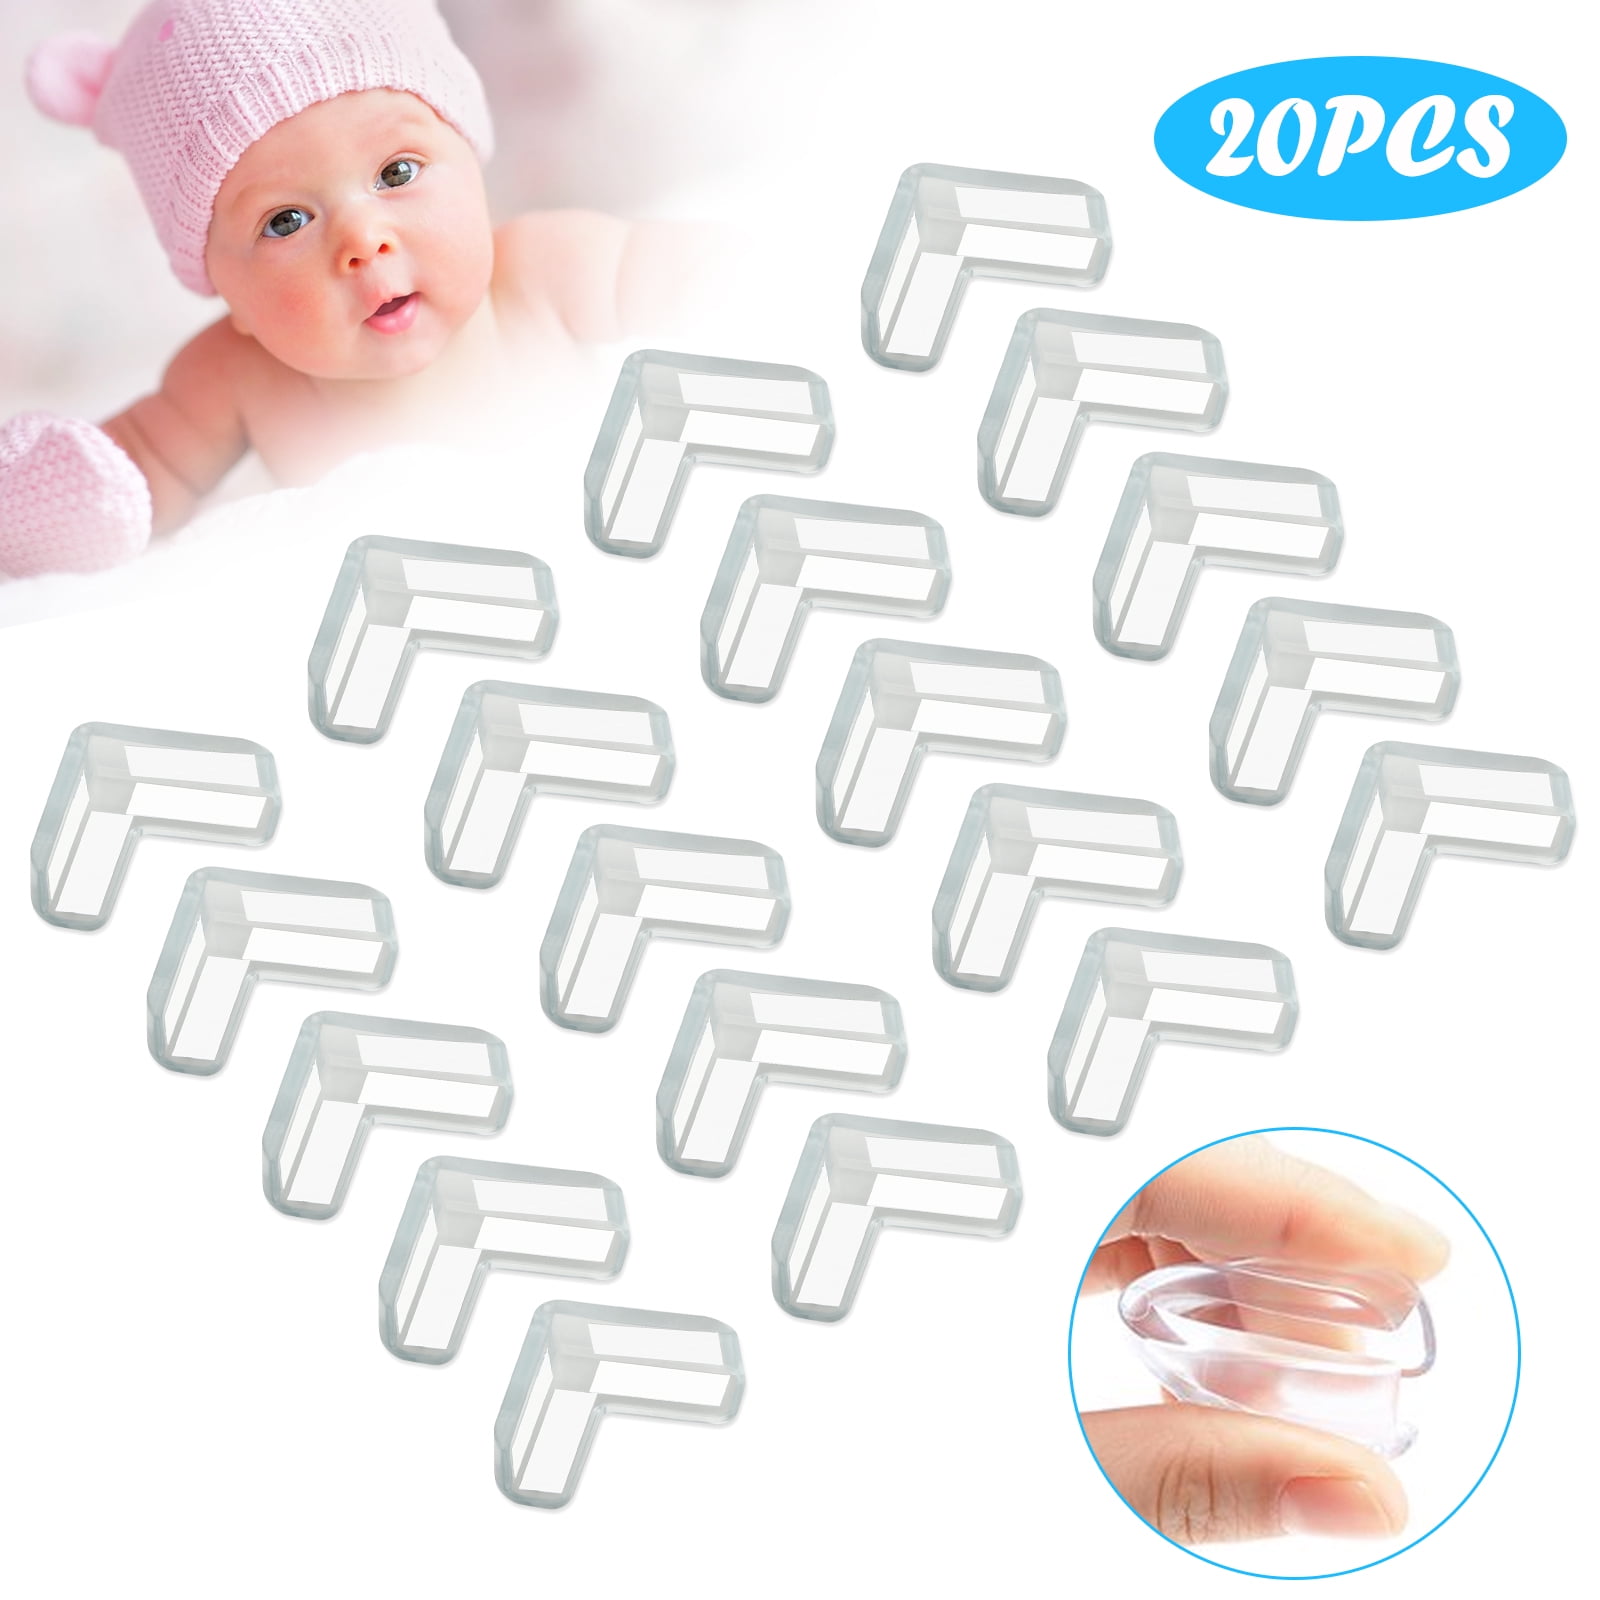 4 x Toddler Baby Kids Safety Soft Corner Table Edge Protector Hot Sale 